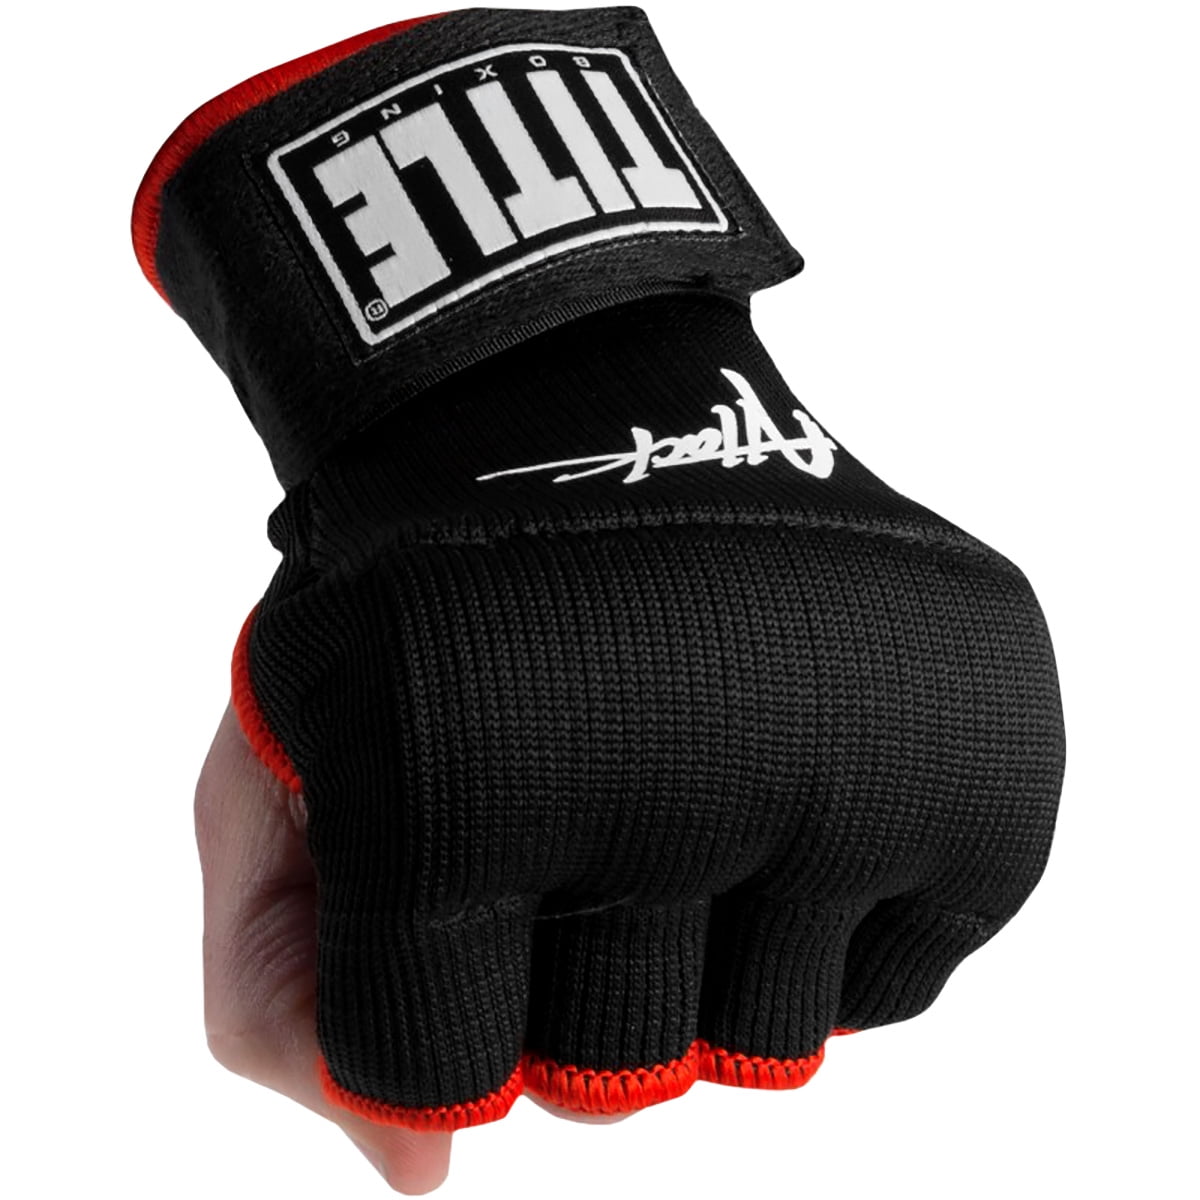 EVEROX Boxing Inner Gloves Quick Hand wraps Punch Bag Training MMA Martial Arts 